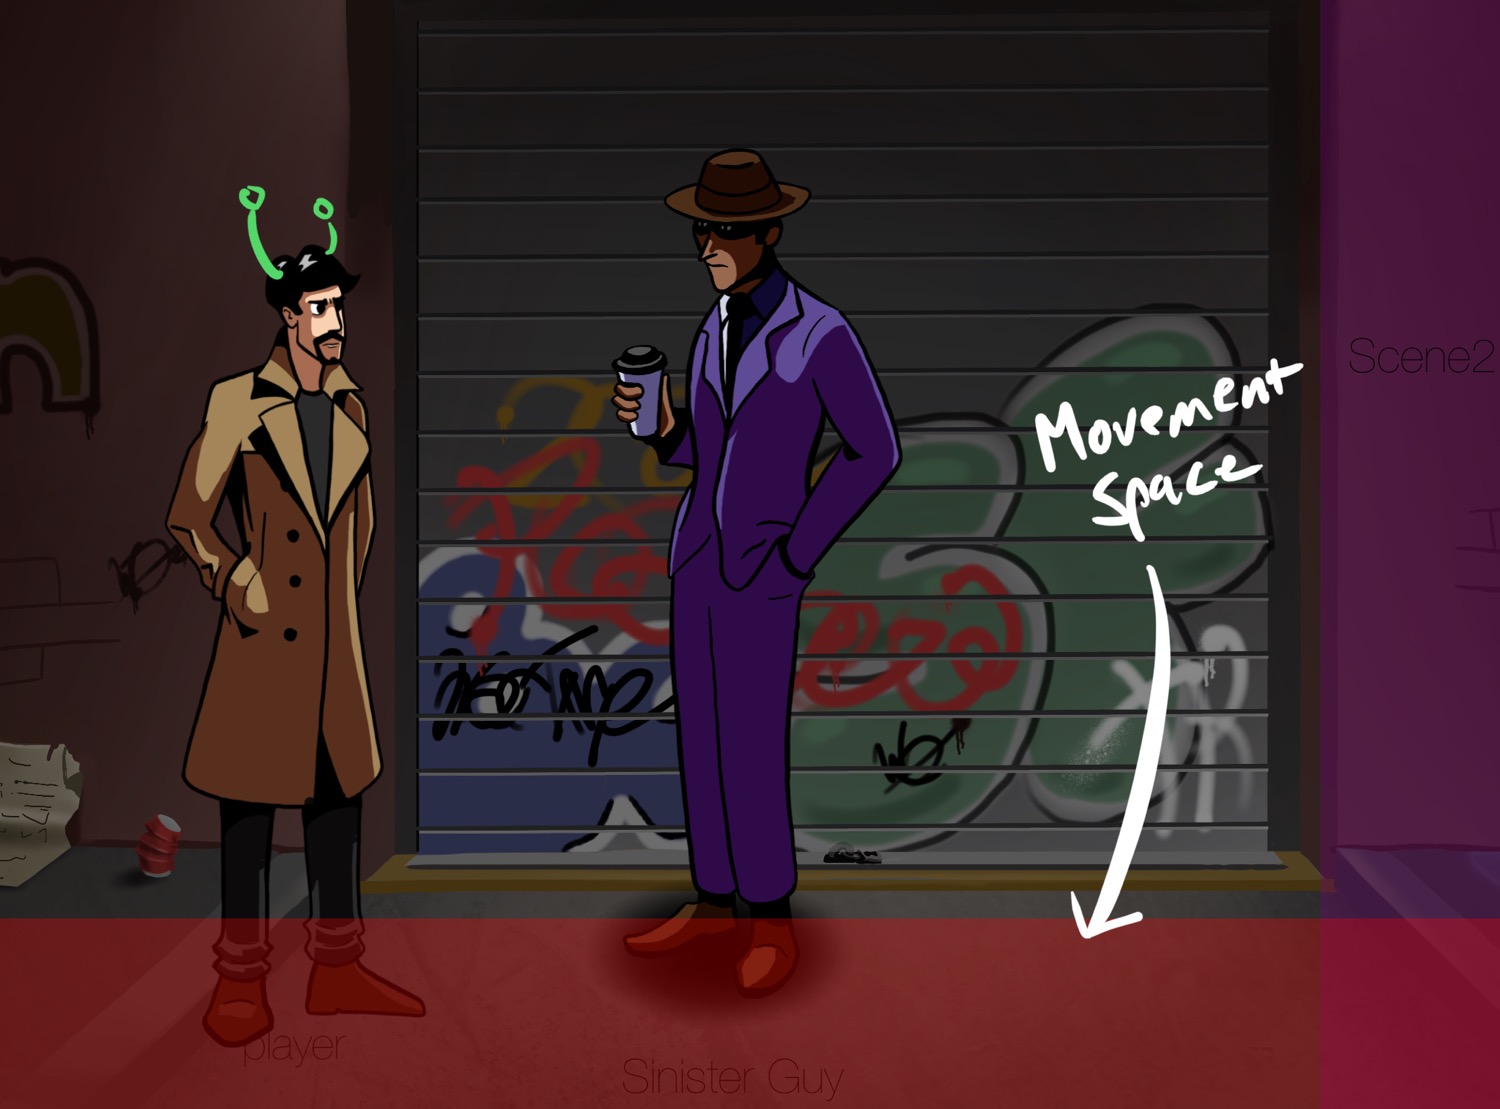 An illustration of two men, one in a trench coat and one in a purple suit, standing in an alley with a garage door in the background. The bottom sixth of the screen is highlighted red to illustrate where the man in the trench coat can move. This red space is marked 'Movement Space'.